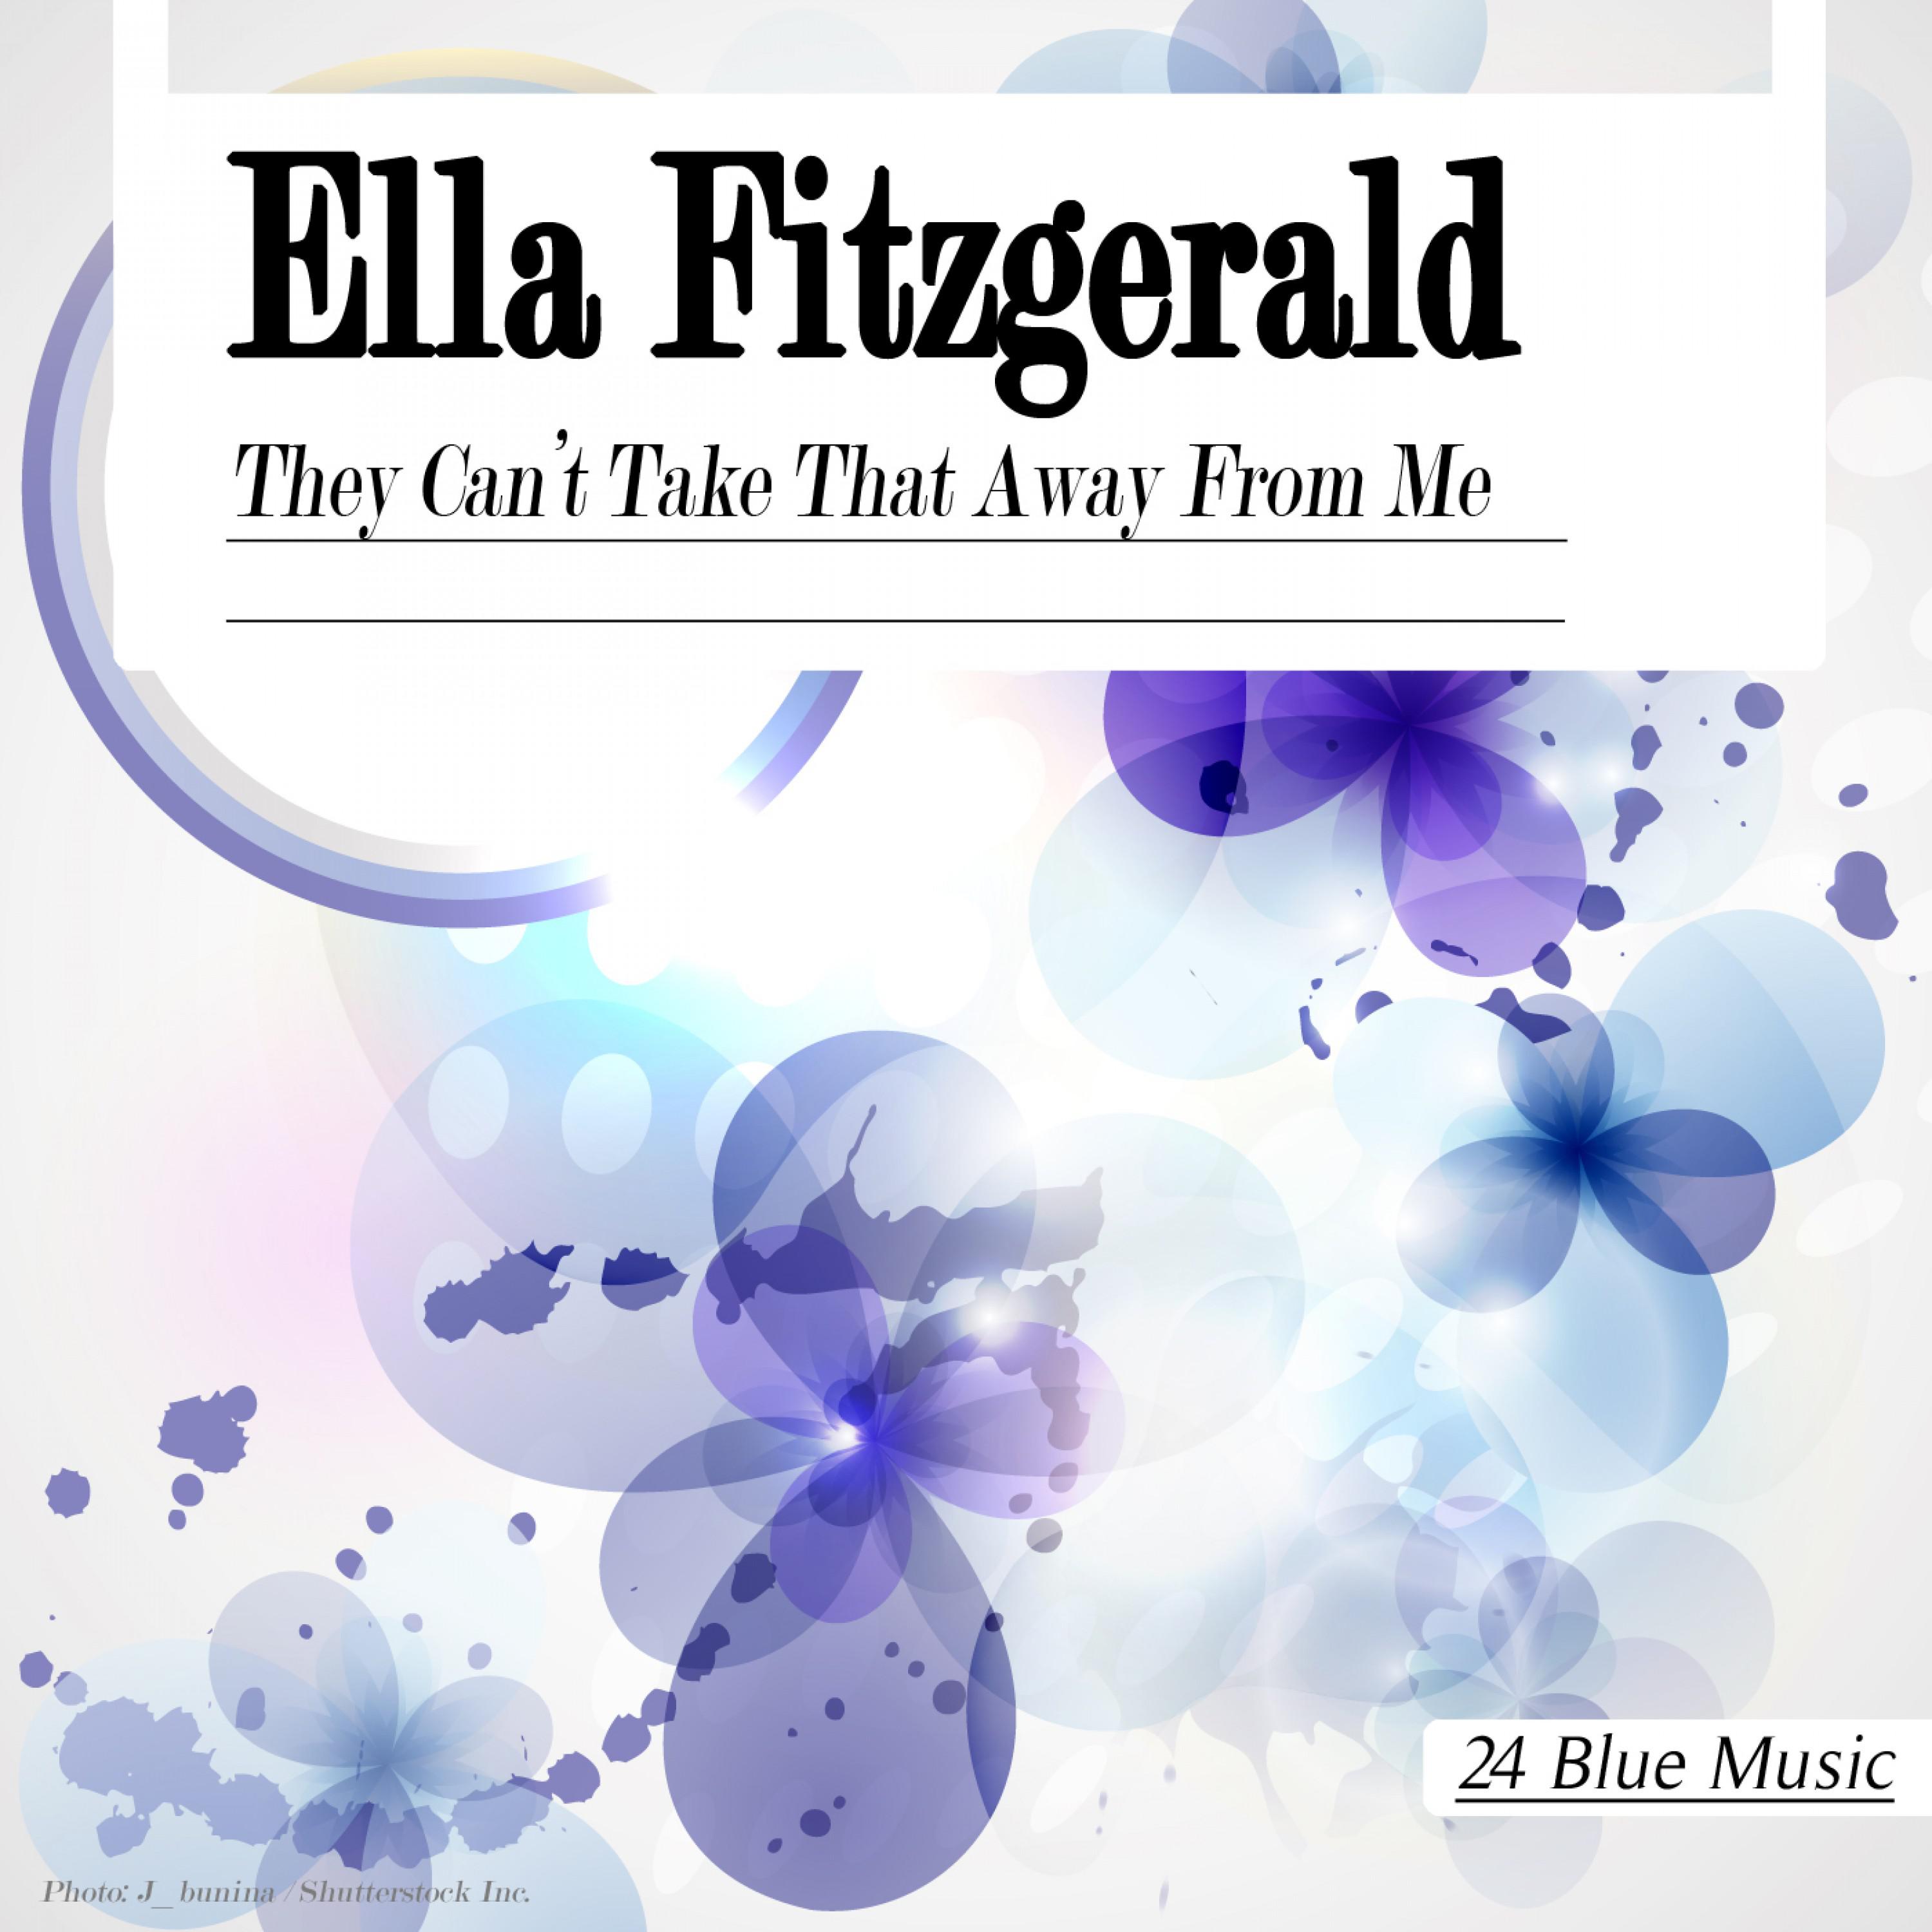 They Can't Take That Away from Me歌词 歌手Ella Fitzgerald / Louis Armstrong-专辑They Can't Take That Away from Me-单曲《They Can't Take That Away from Me》LRC歌词下载